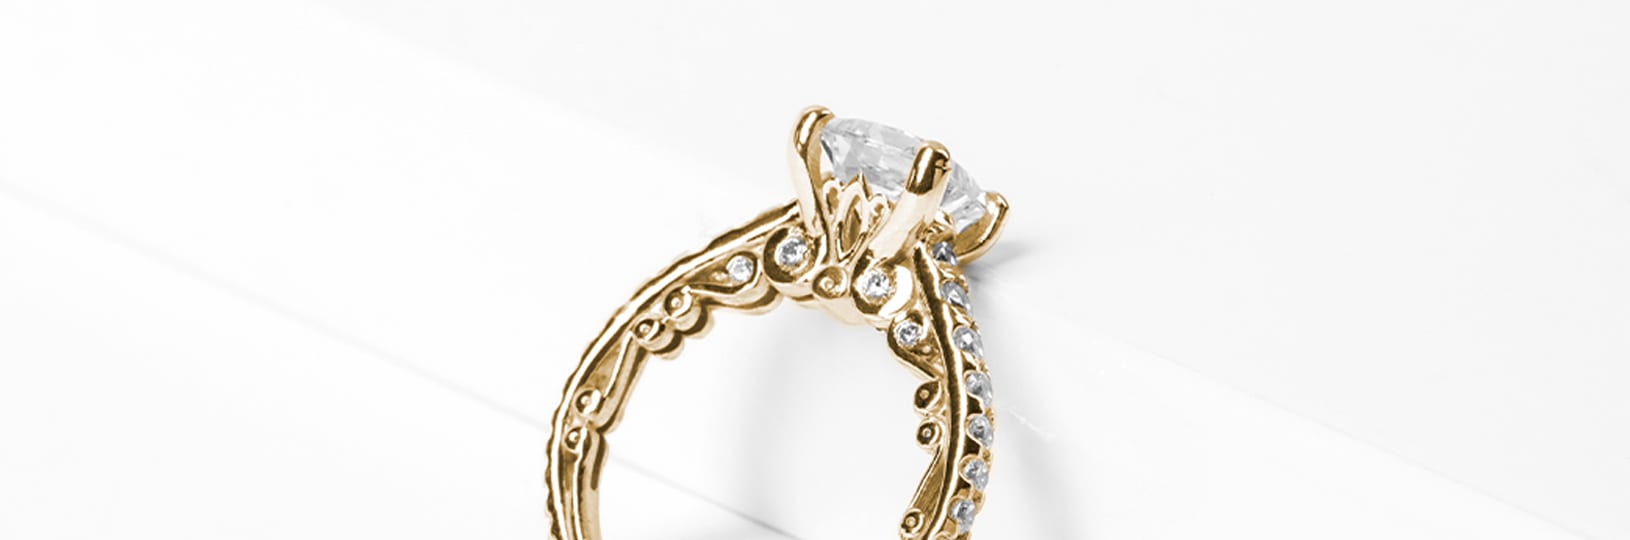 A yellow gold engagement ring with filigree